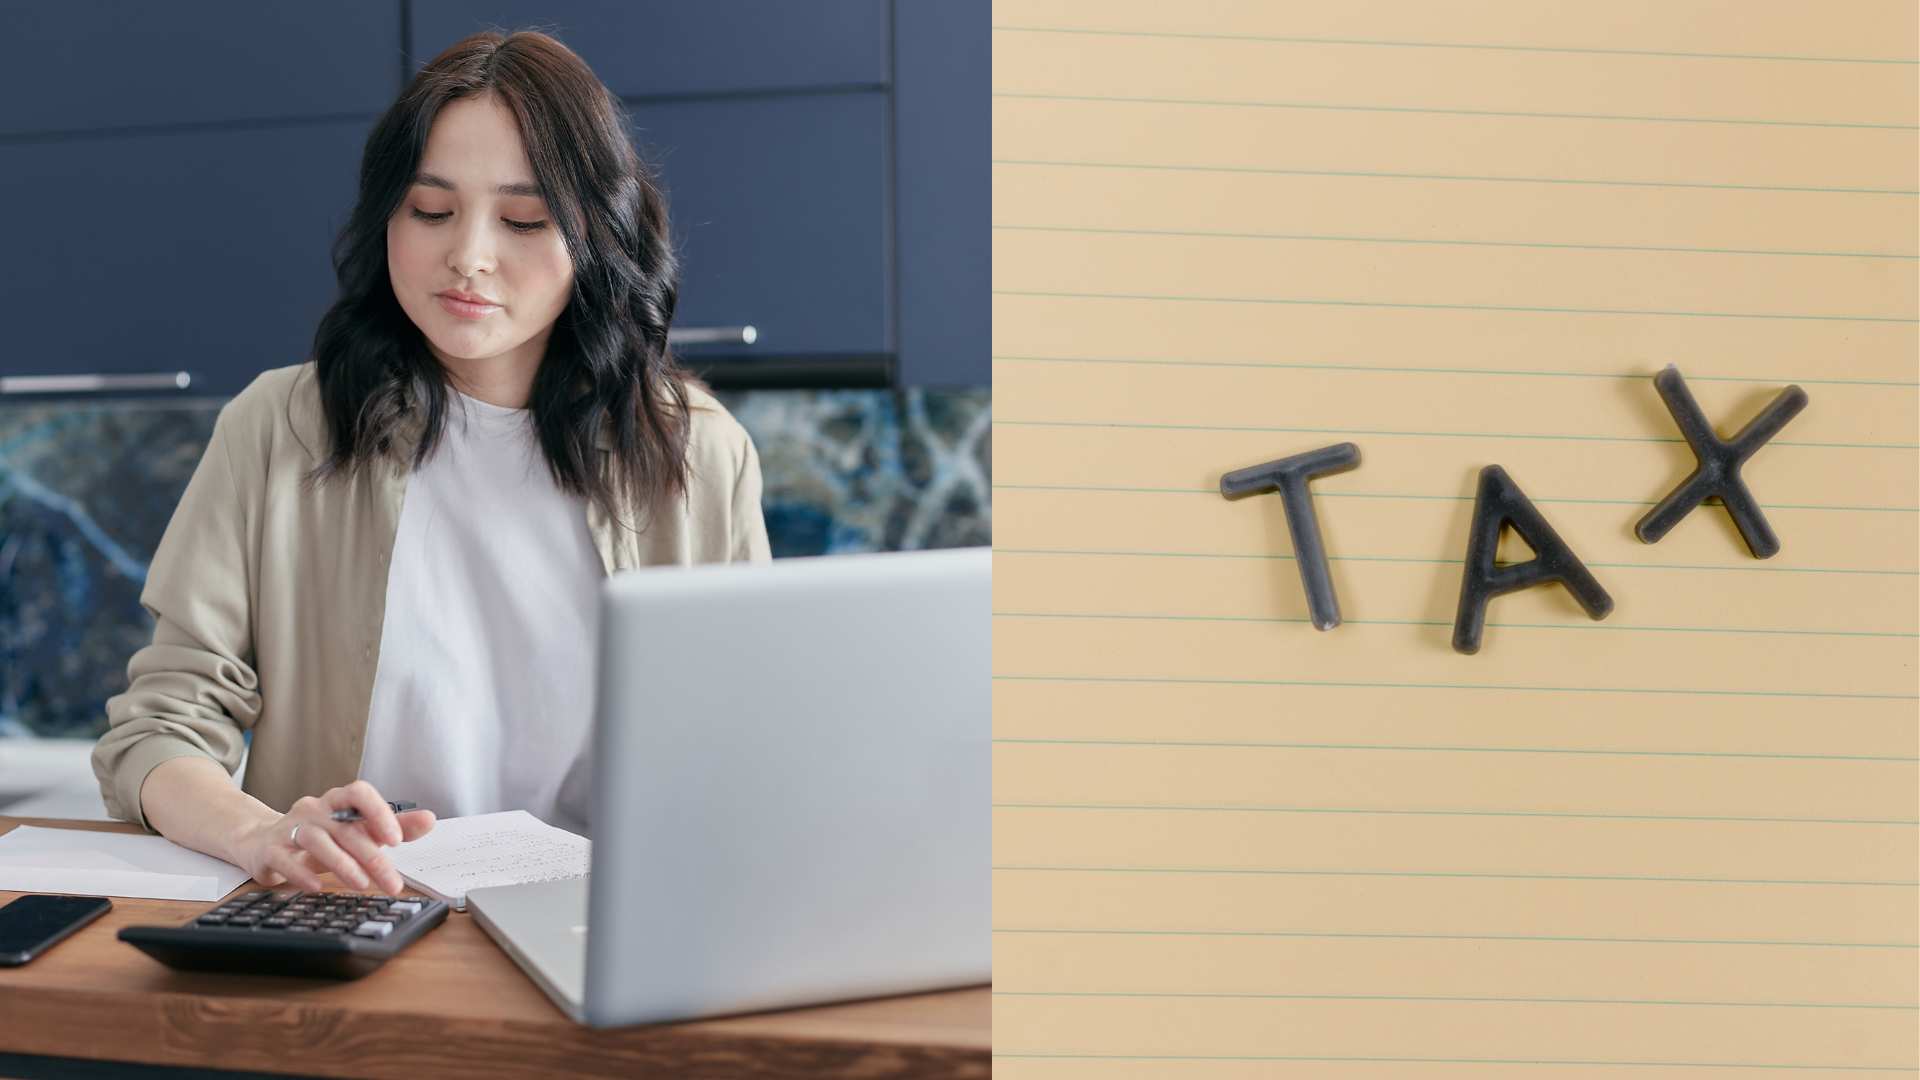 Girl at computer with the word TAX next to her depicting estate planning in Texas.